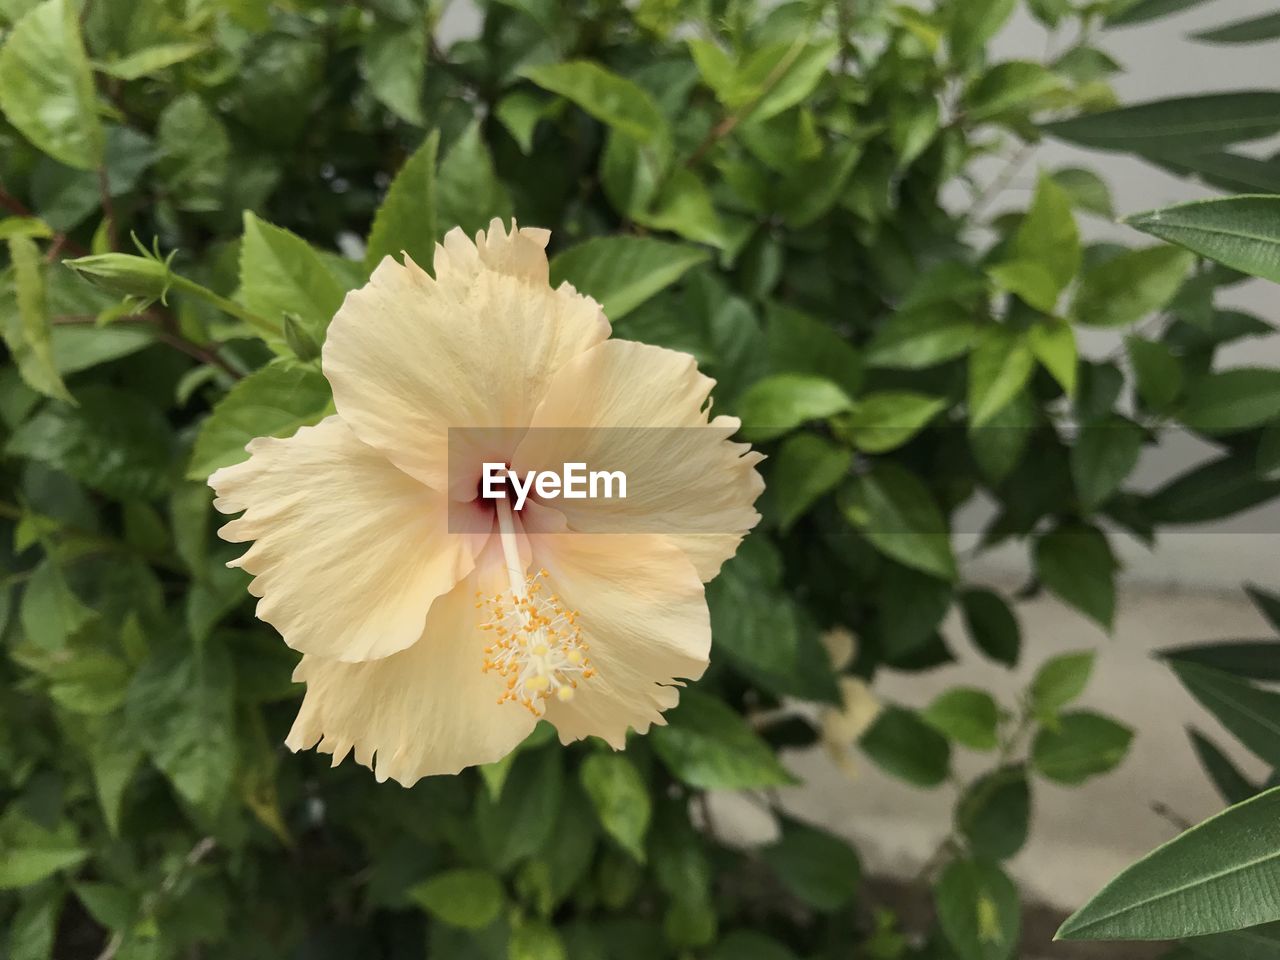 flower, flowering plant, plant, freshness, petal, flower head, hibiscus, beauty in nature, inflorescence, fragility, growth, leaf, plant part, close-up, nature, pollen, malvales, green, no people, outdoors, white, focus on foreground, springtime, blossom, stamen, botany, day